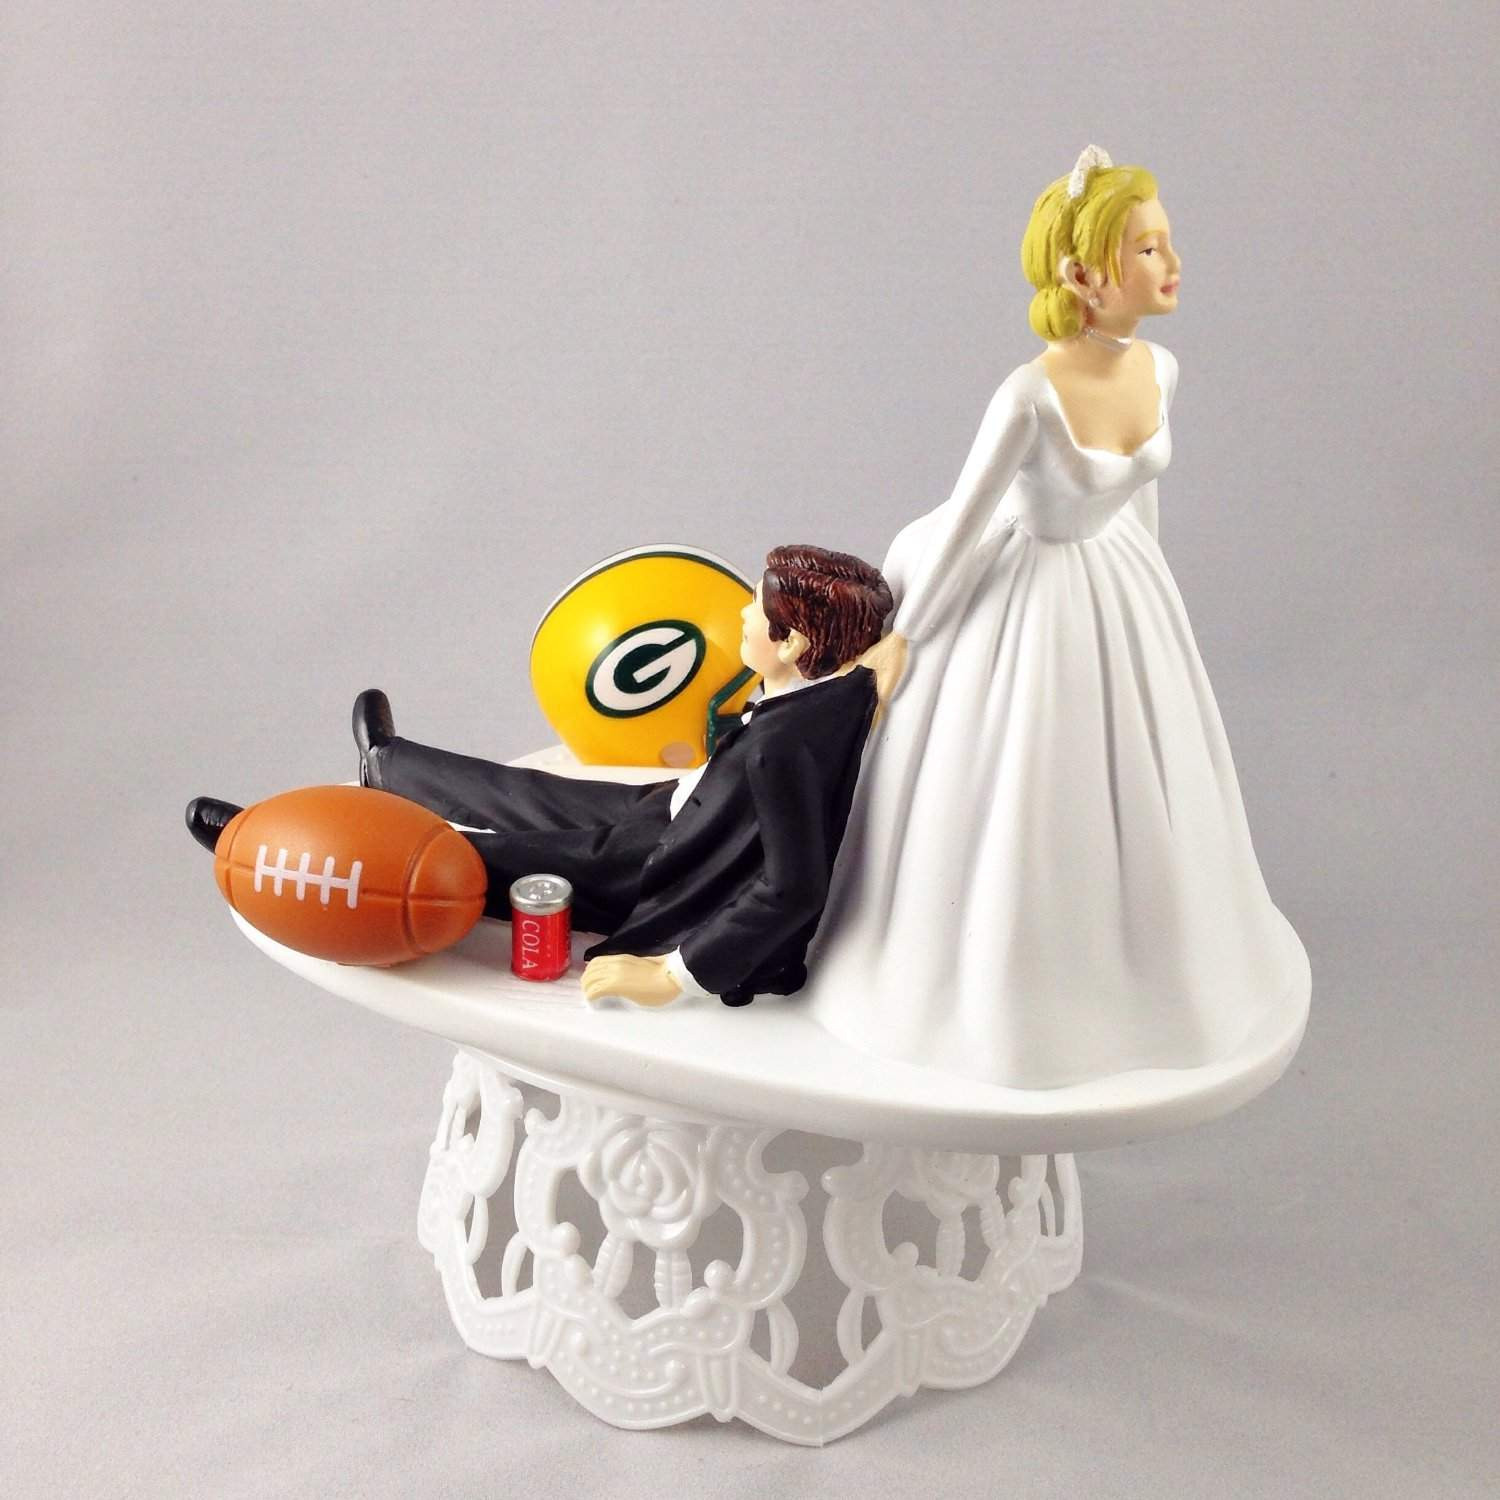 Wedding Cakes Tops
 11 Funny Wedding Toppers for Your Cake 2018